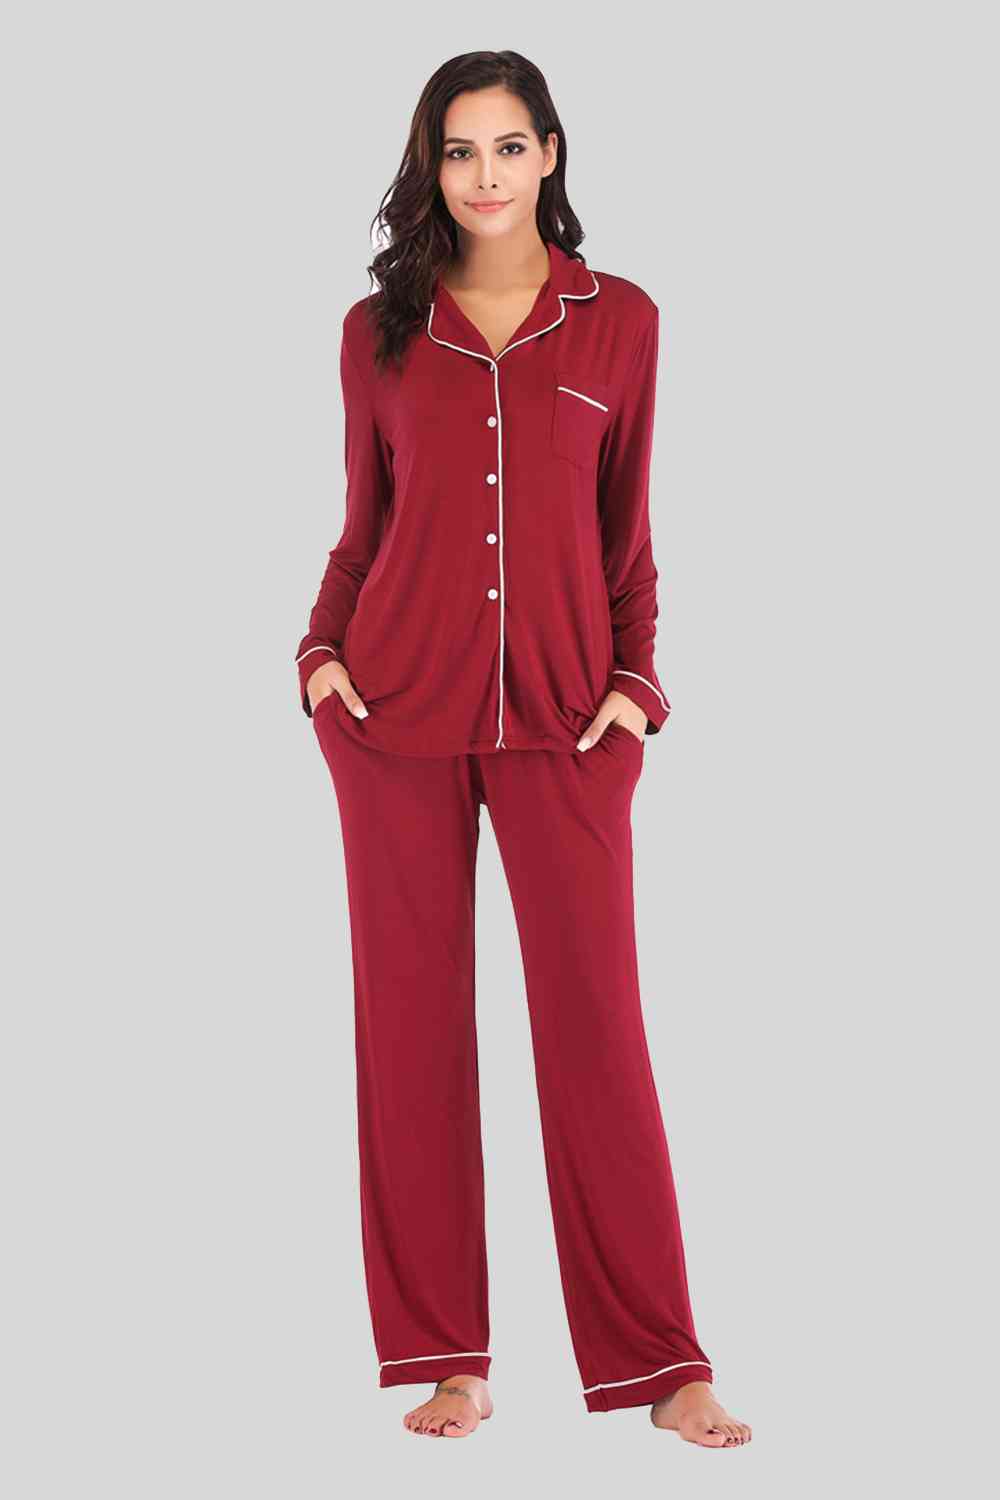 Collared Neck Long Sleeve Loungewear Set with Pockets (9 Colors) Loungewear Krazy Heart Designs Boutique Wine S 